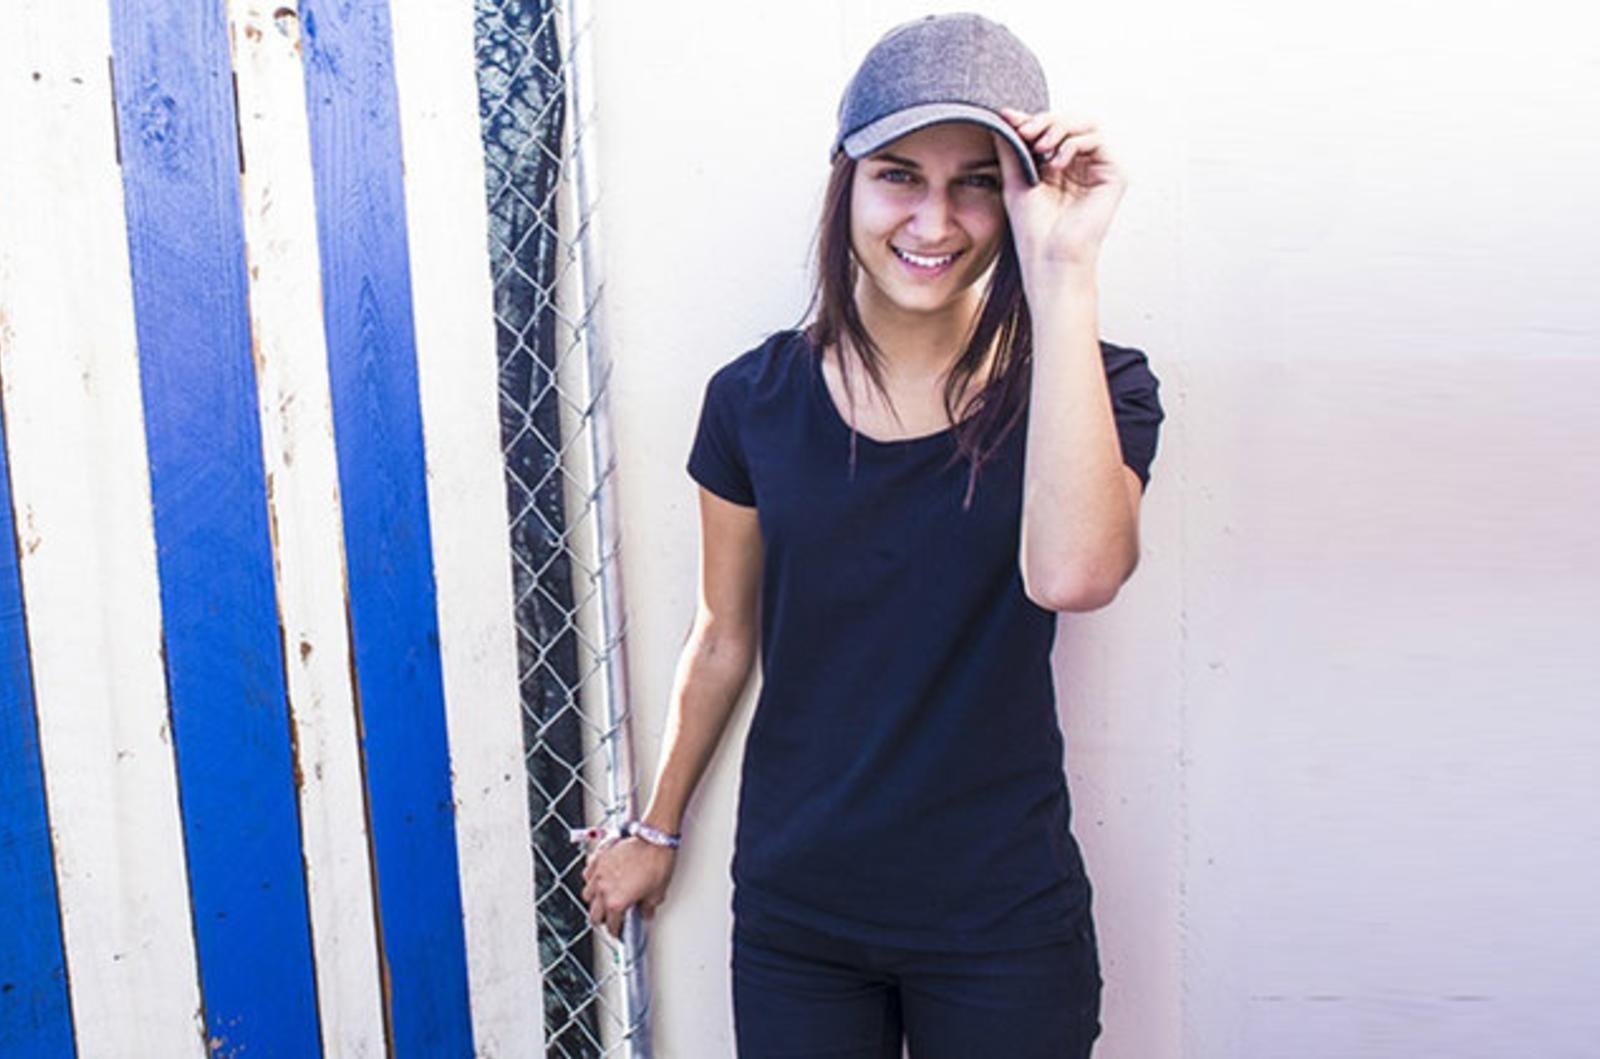 Watch: Catching Up With REZZ On Her 2016 Tour (Boston). REZZ fills